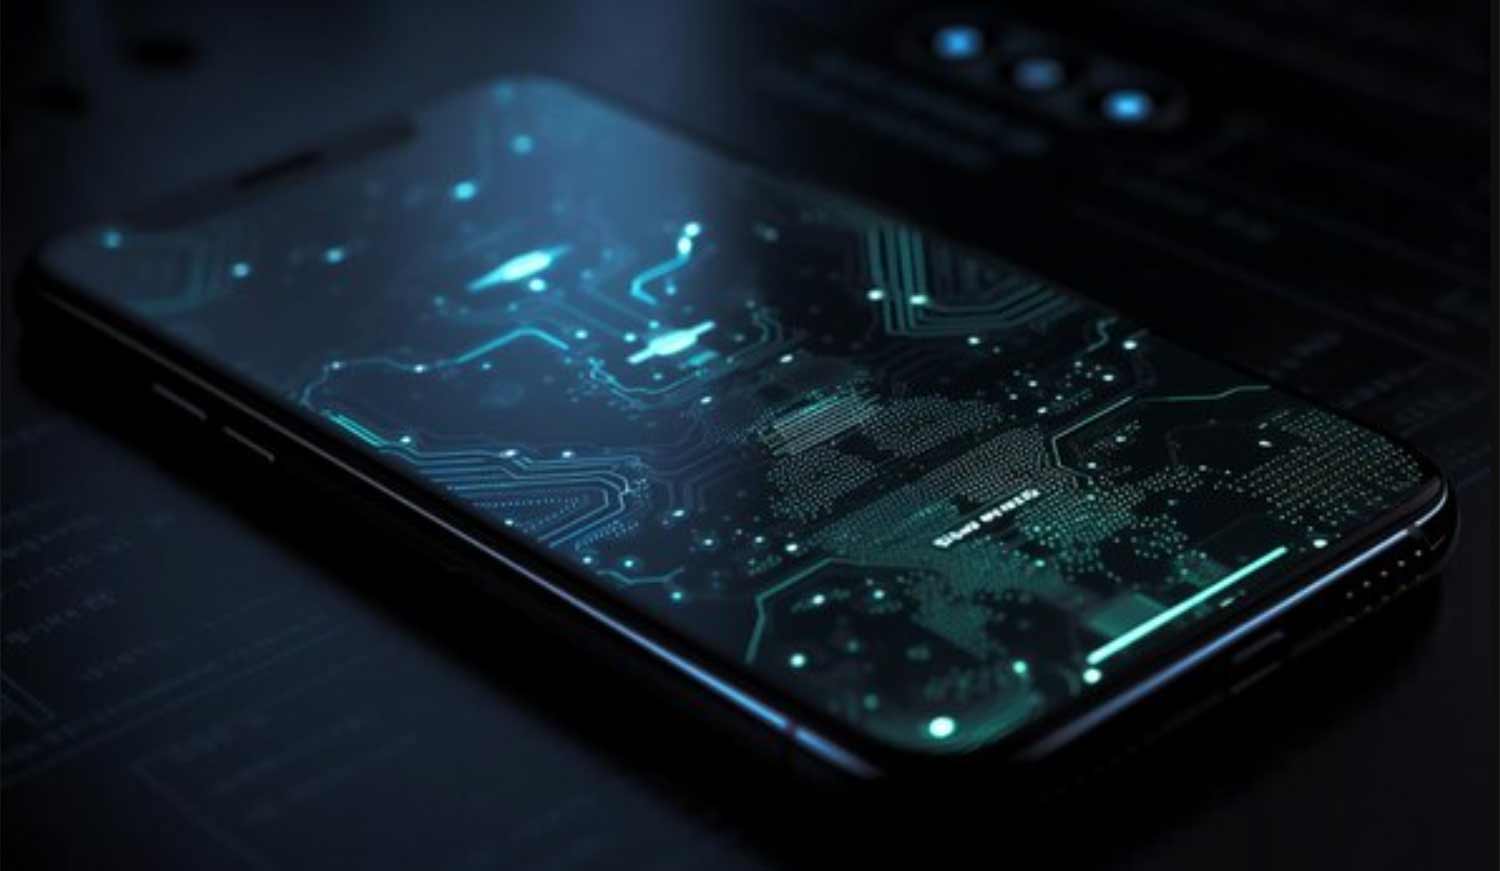 From GPUs to NPUs: AI Evolution of Hardware in Smartphones